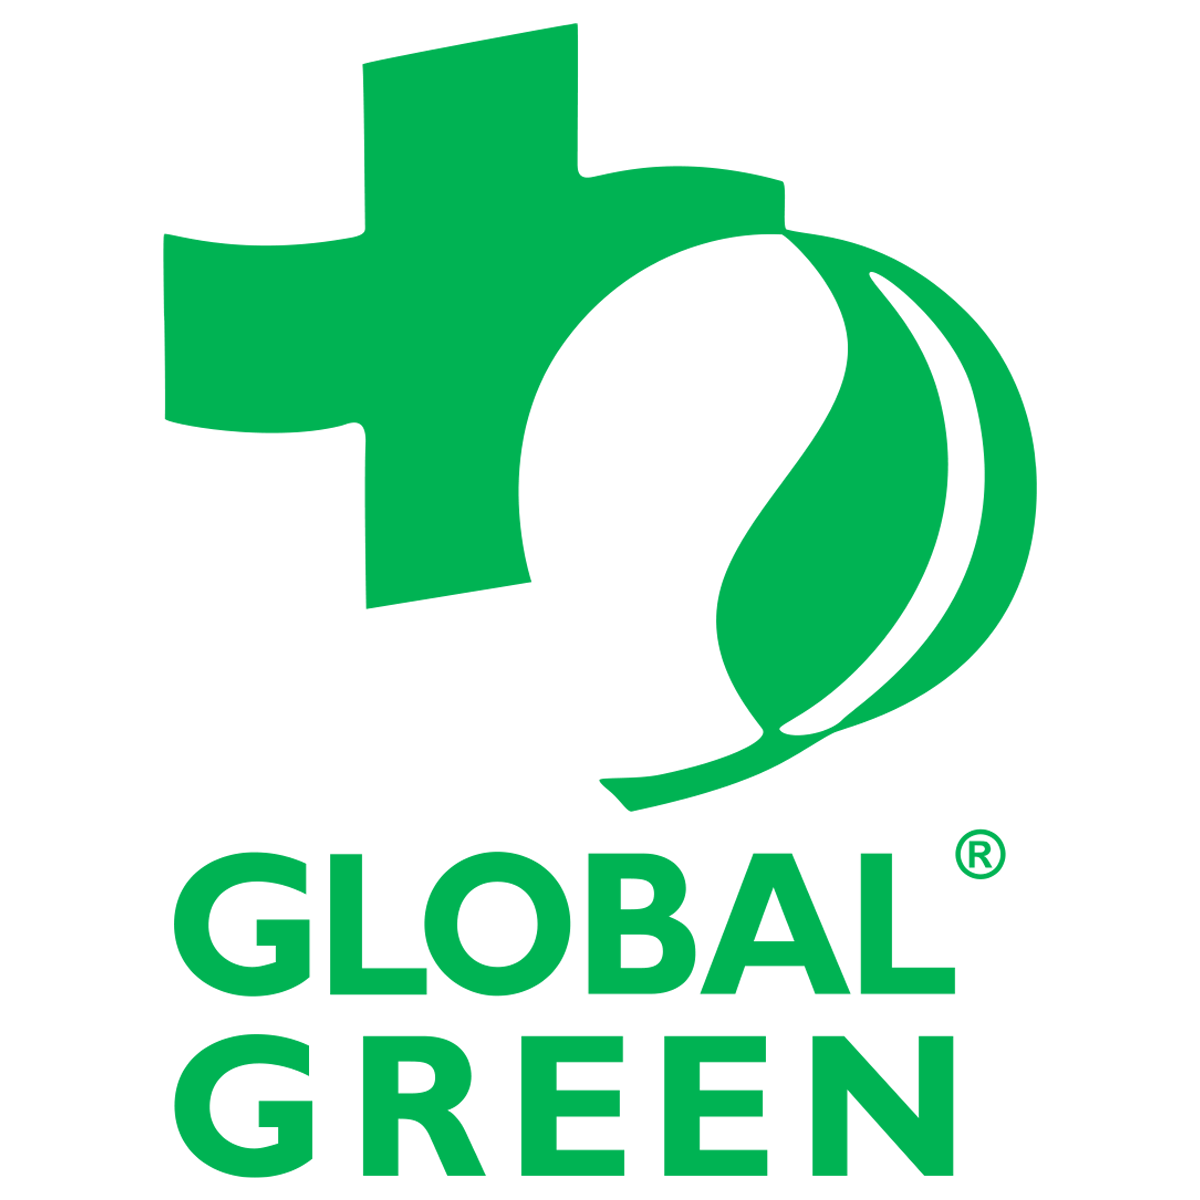 Global Green and the Sustainable Development Goals